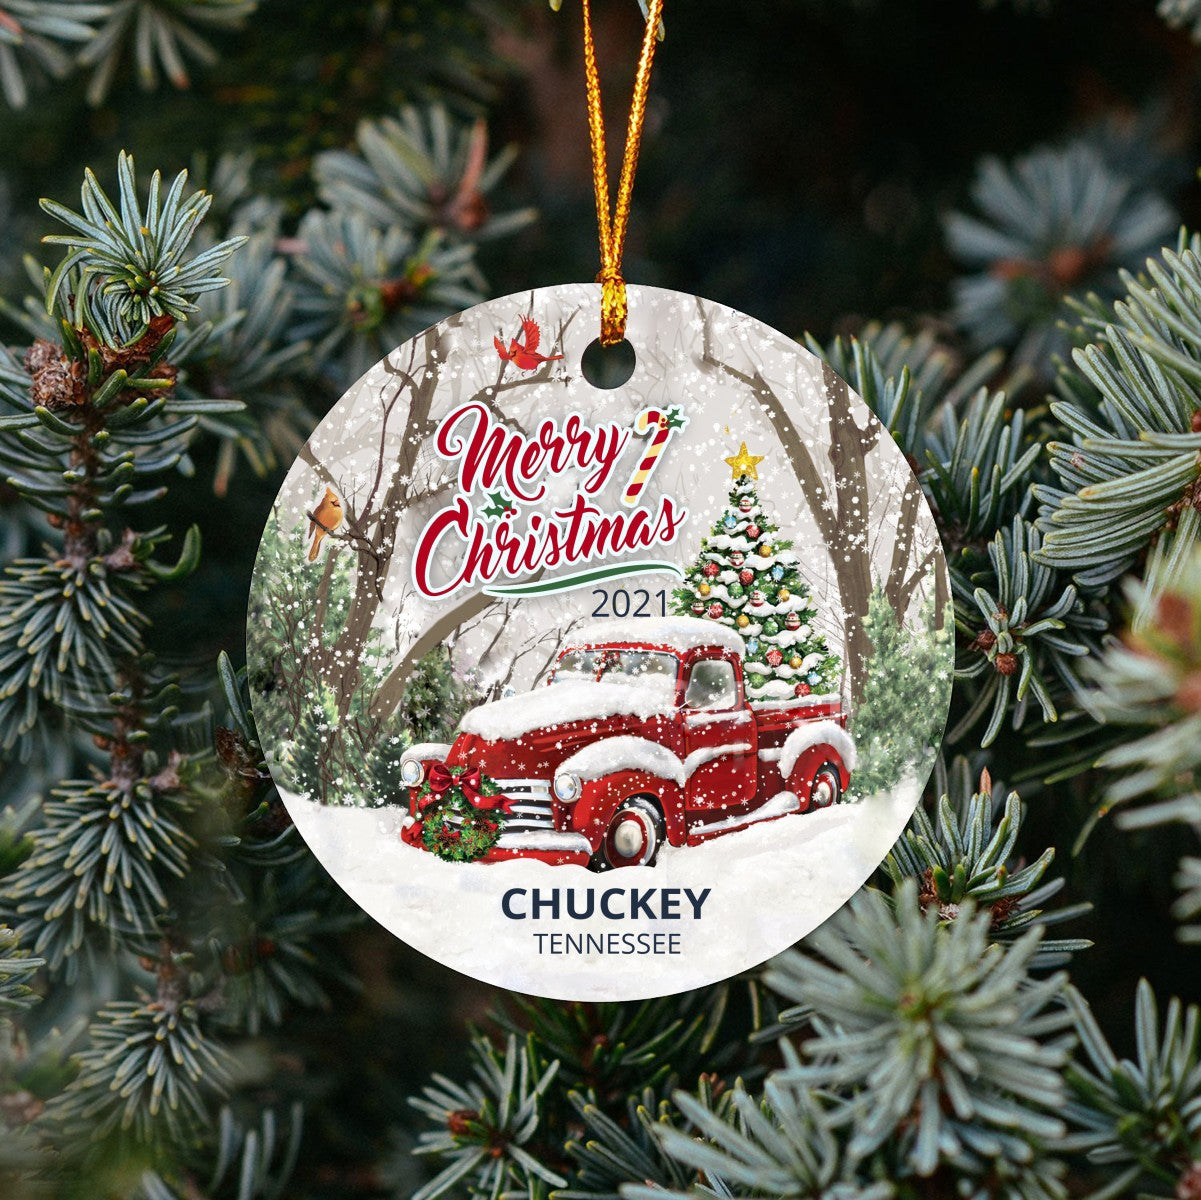 Christmas Tree Ornaments Chuckey - Ornament With Name City, State Chuckey Tennessee TN Ornament - Red Truck Xmas Ornaments 3'' Plastic Gift For Family, Friend And Housewarming